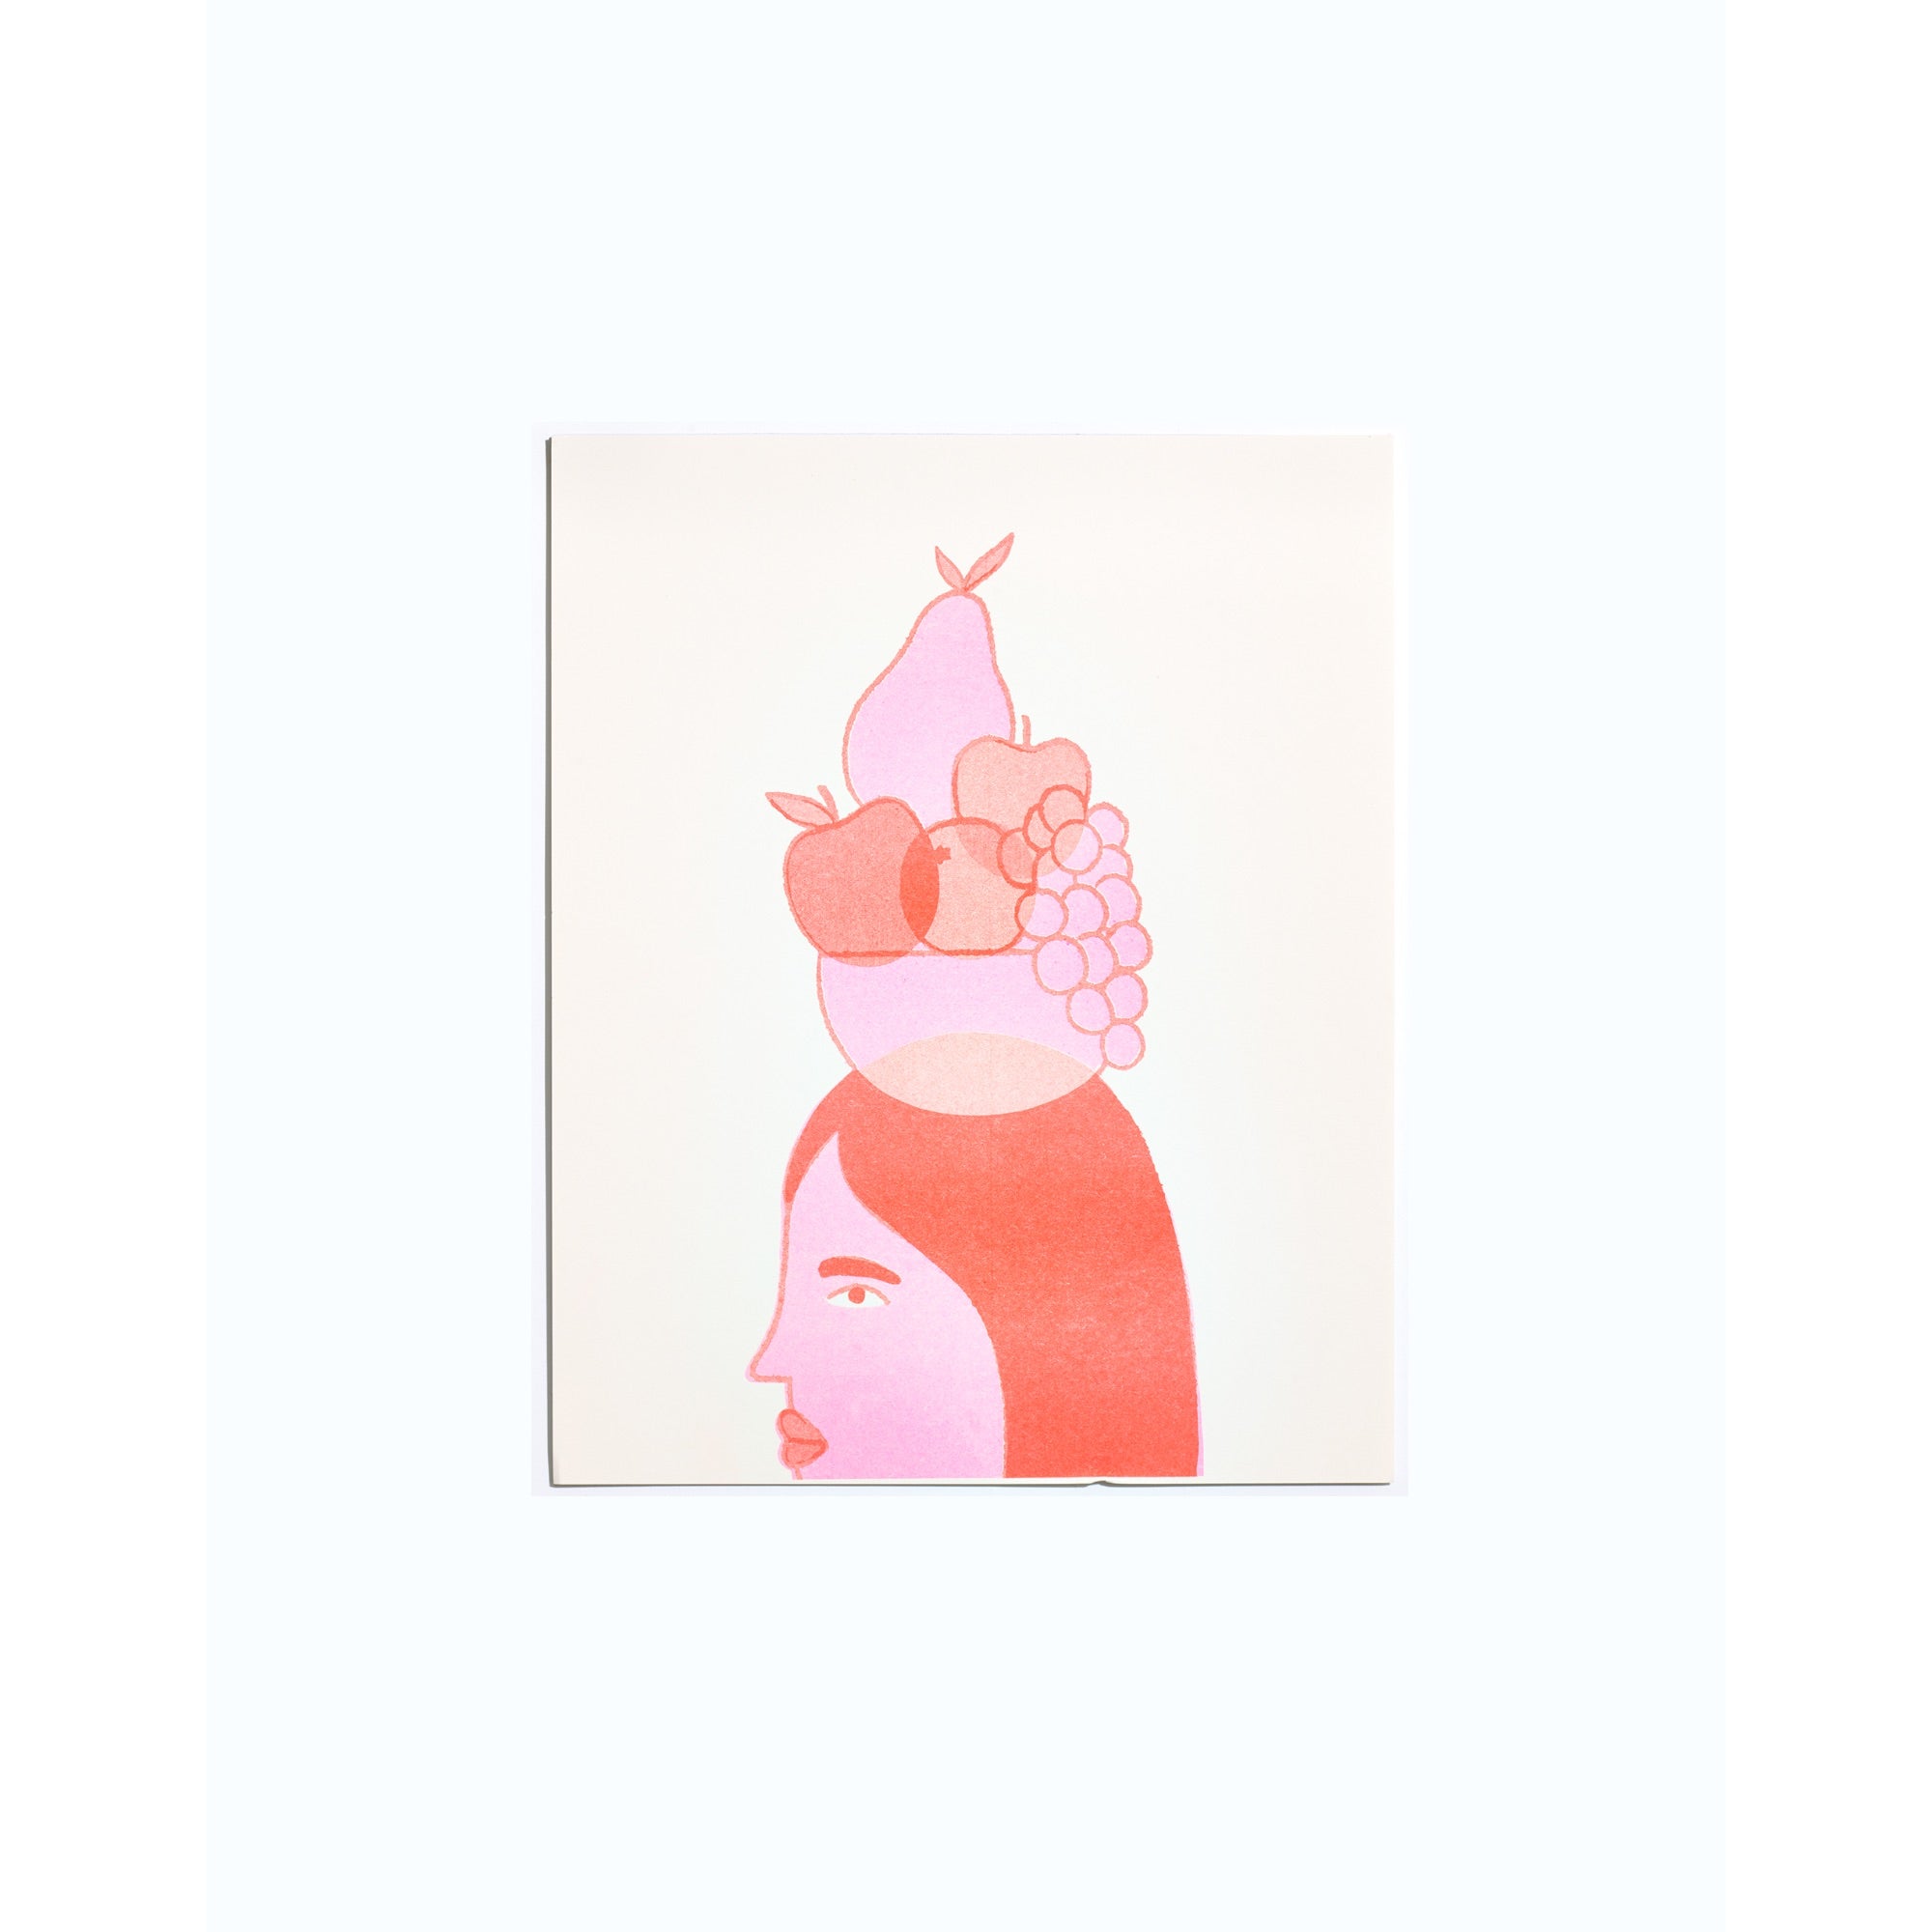 pink illustration of a woman with fruit on her head